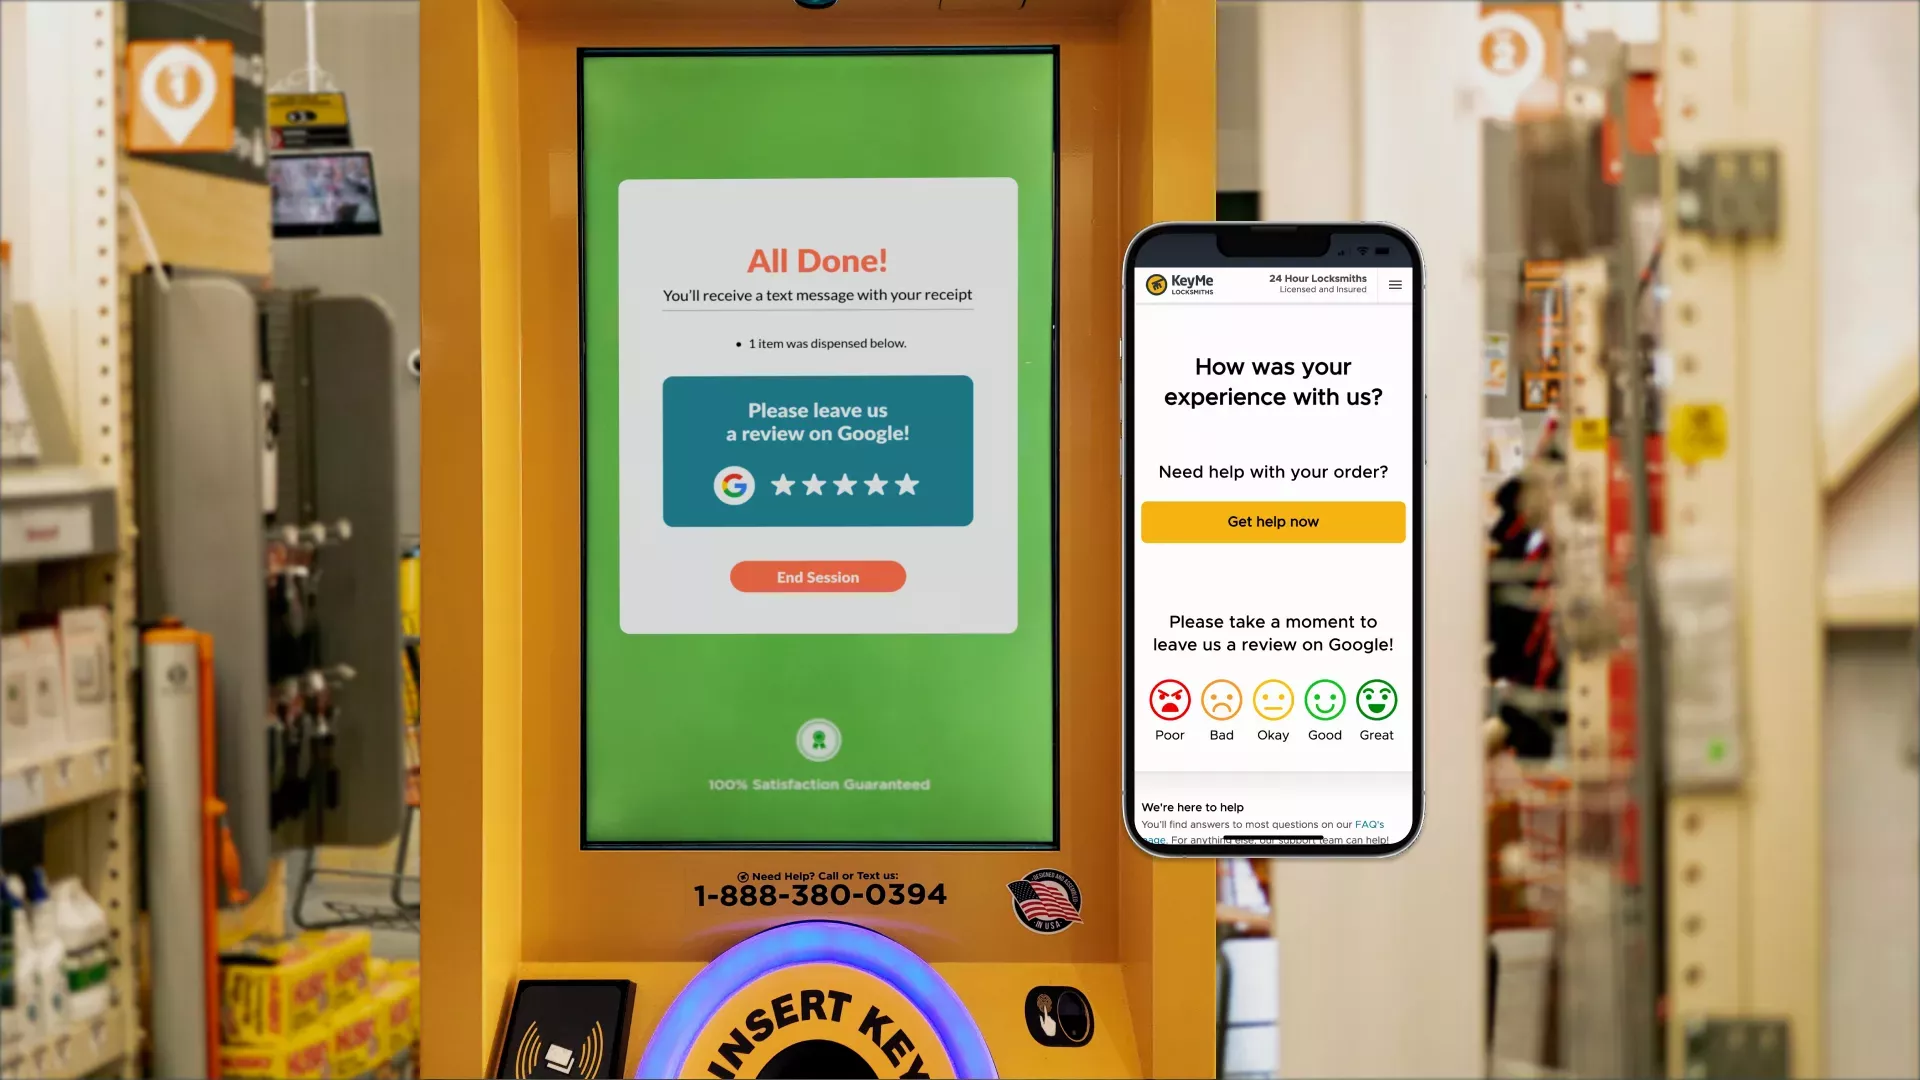 KeyMe kiosk showing a screen asking the customer to leave a review and mobile device asking the customer to tell KeyMe about their experience. The kiosk's screen is the screen shown after an order session ends. The mobile device displays a webpage with a button labeled 'Get help now' as well as five emojis labeled 'Poor', 'Bad', 'Okay', 'Good', and 'Great'.